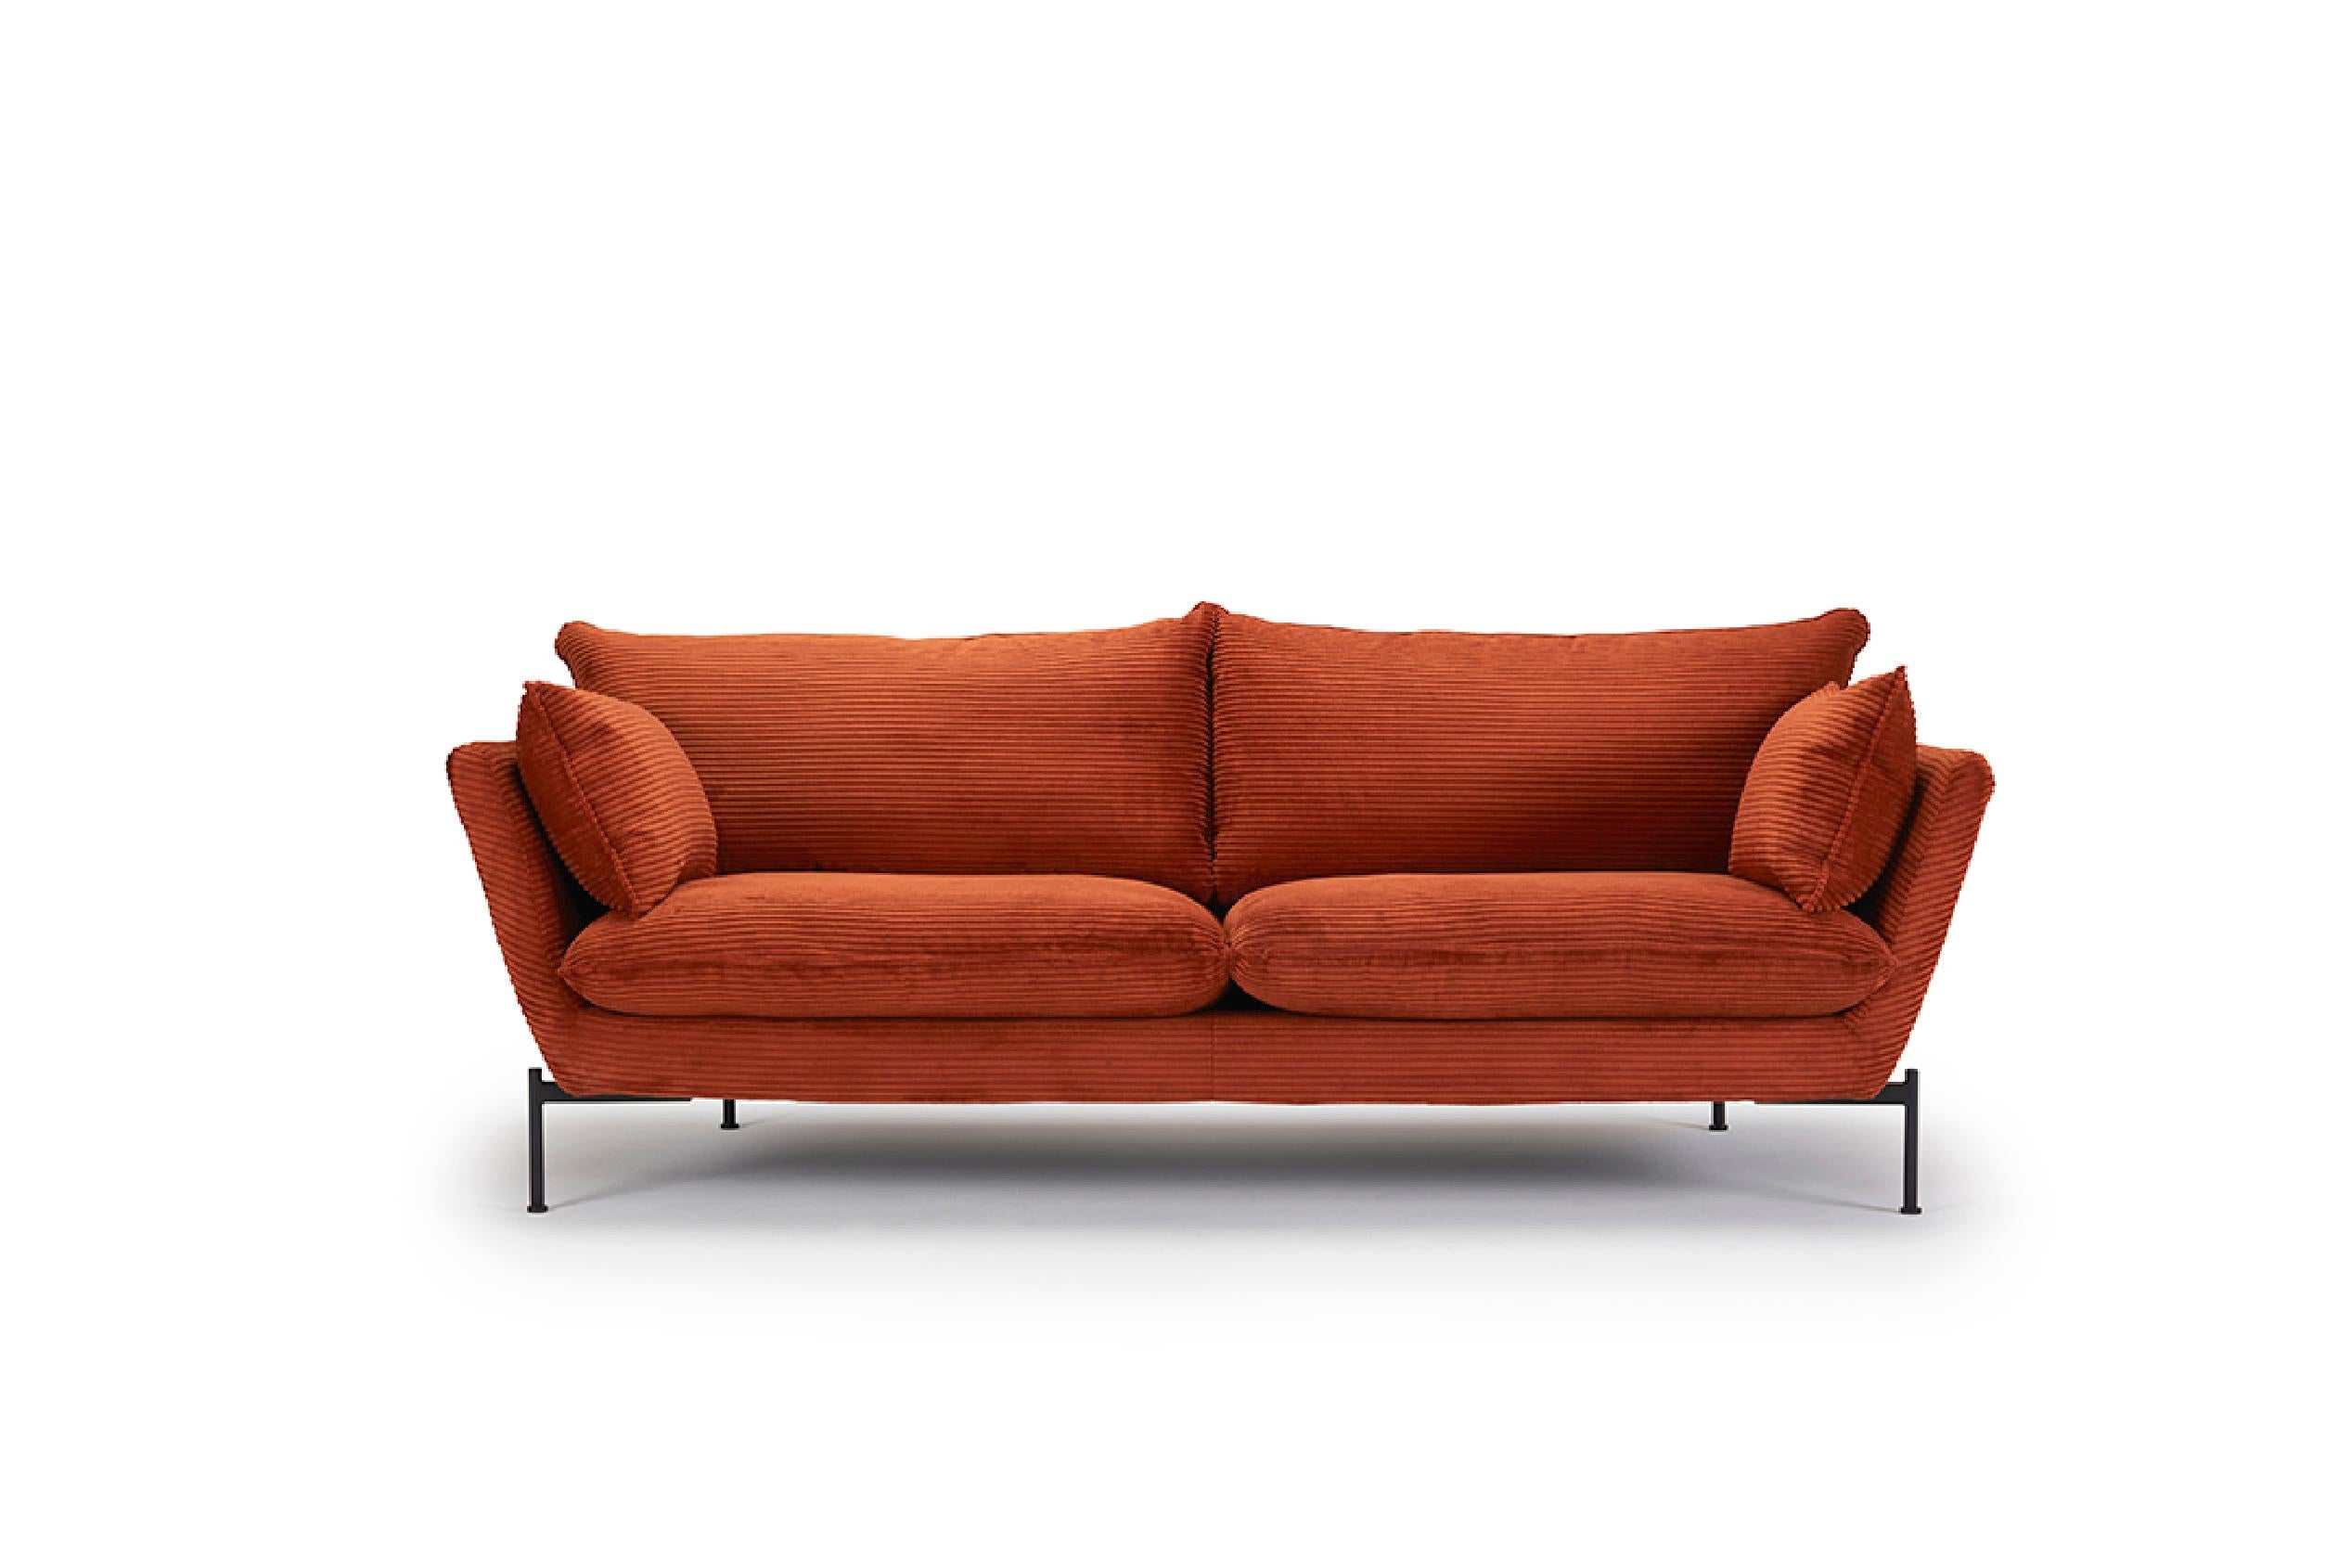 Modern Hayche Nave Lux 2 Seater Sofa - Red, UK, Made to Order For Sale